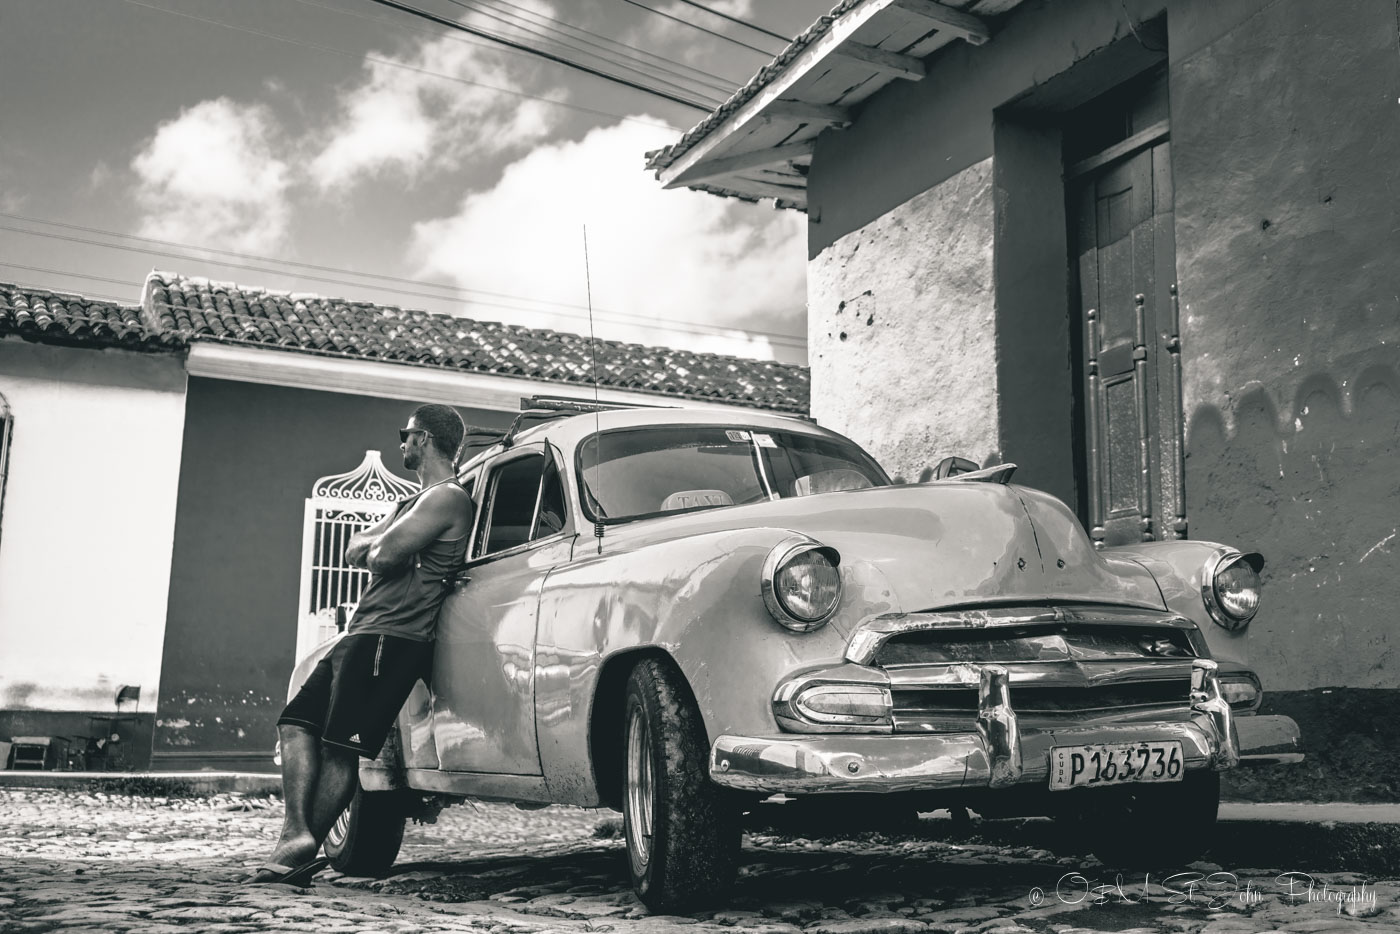 Cuba Travel Tips: What You Need to Know Before Traveling to Cuba